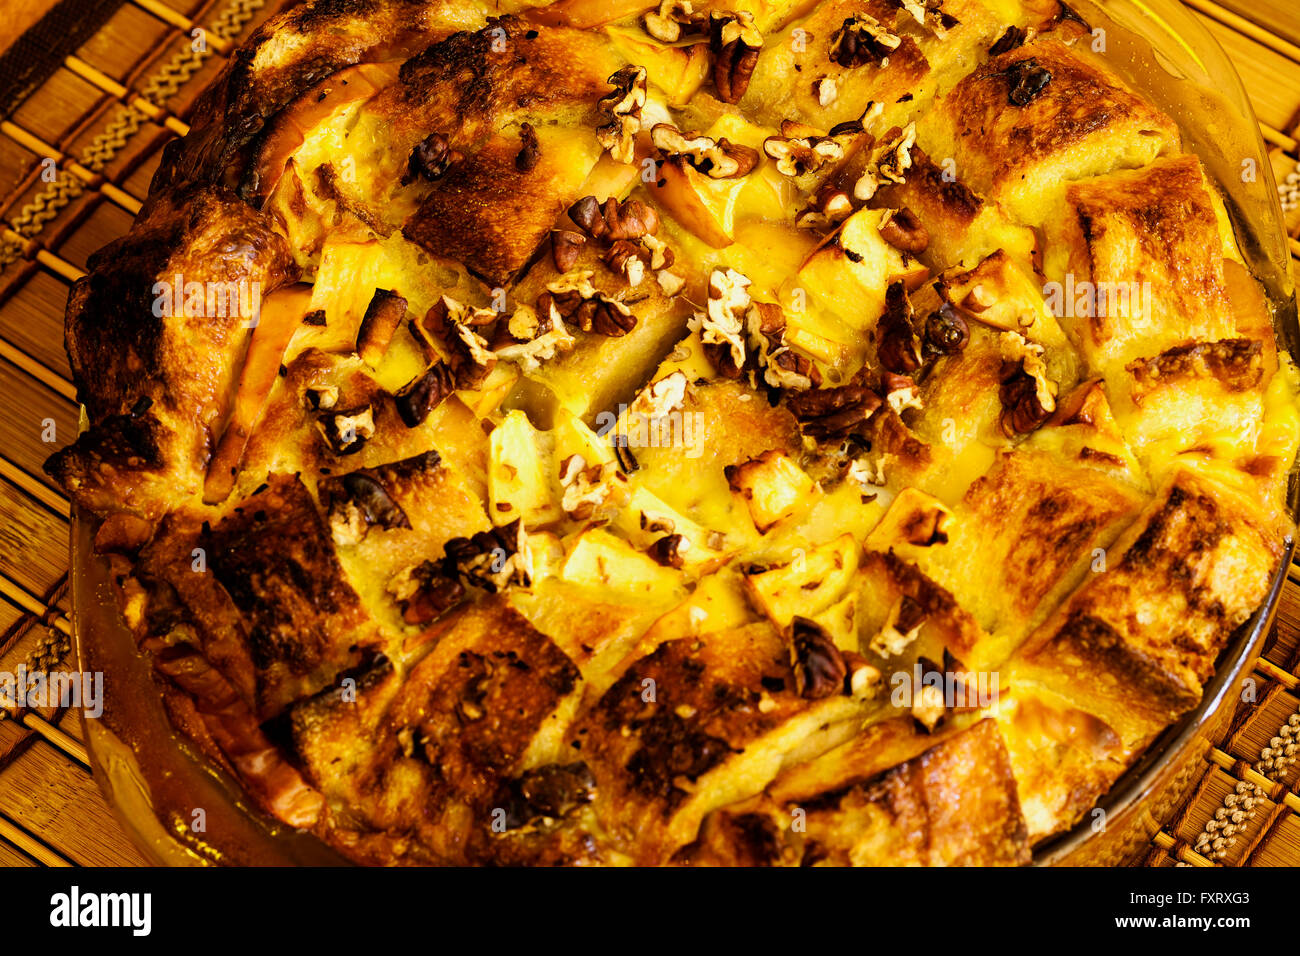 Tight Shot Of French Bread Casserole In Round Dish Stock Photo